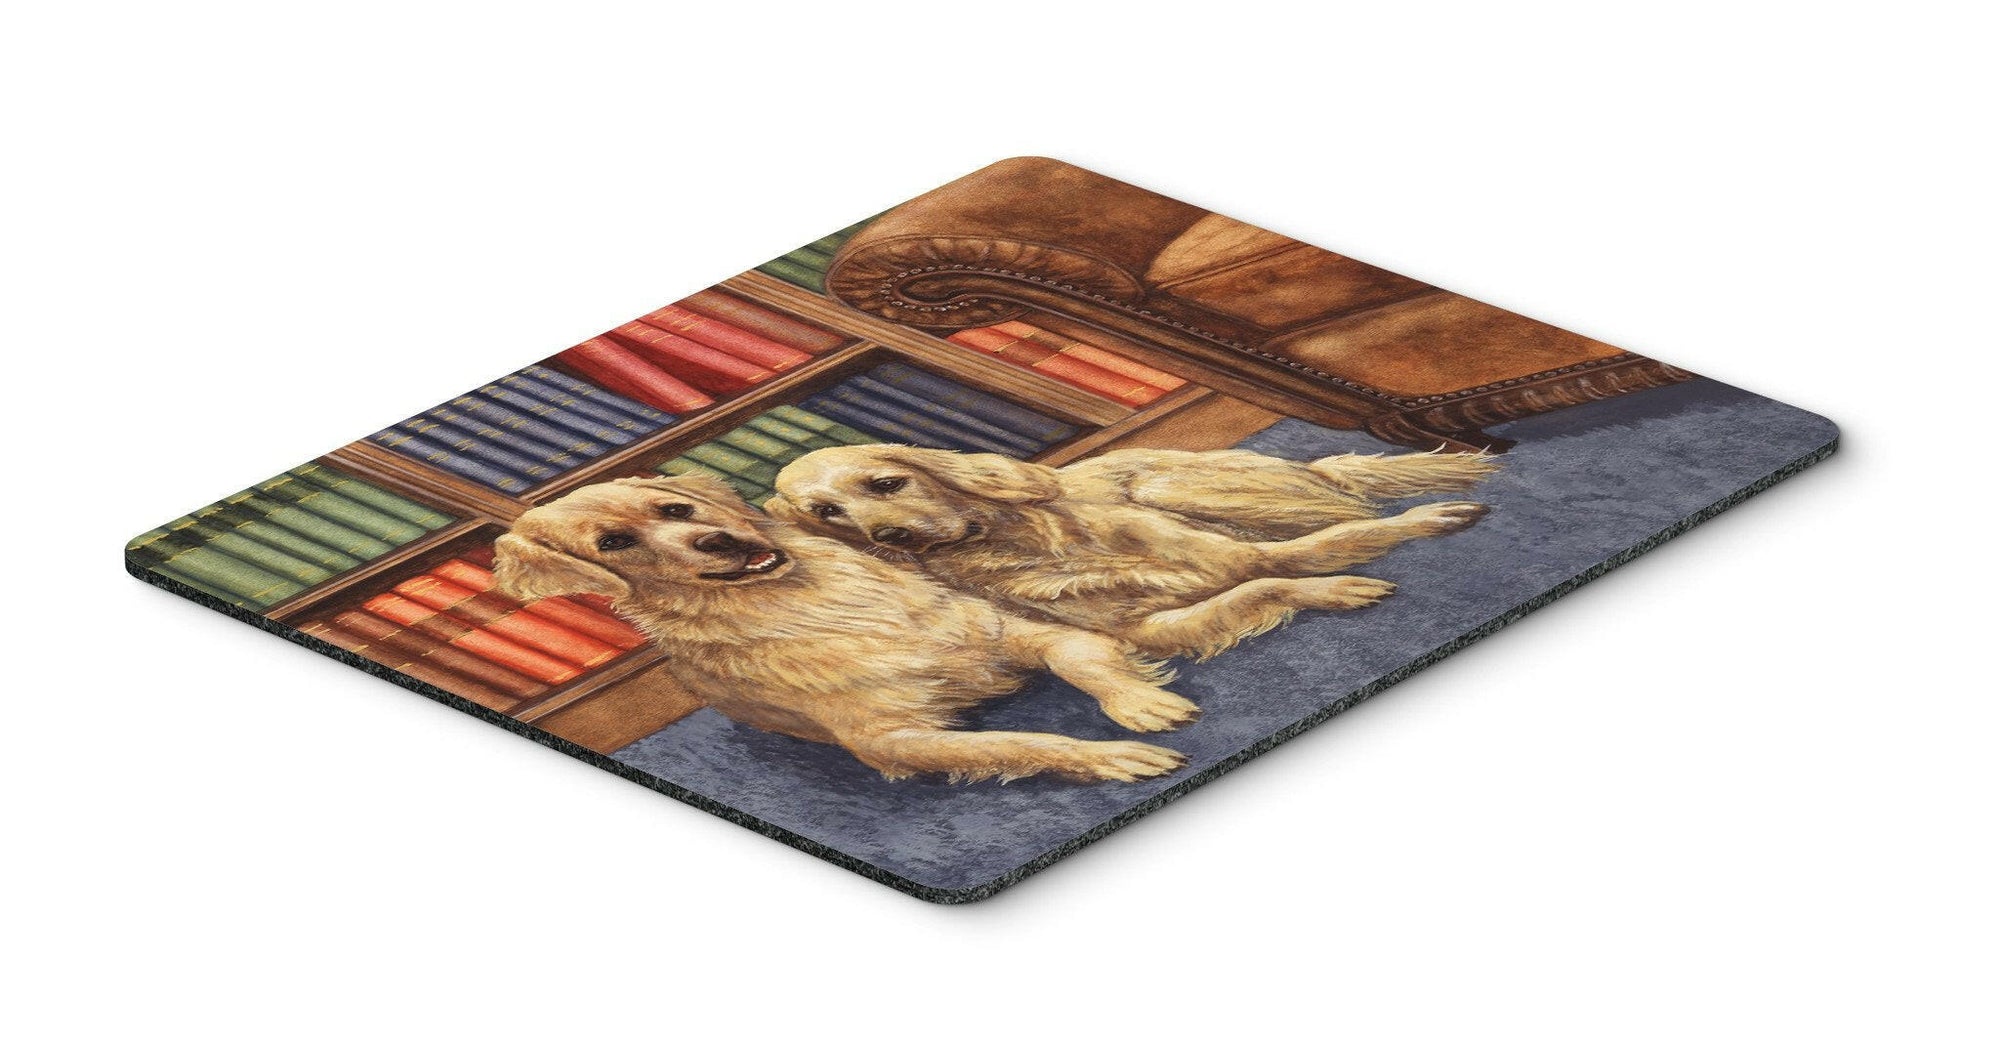 Golden Retrievers in the Library Mouse Pad, Hot Pad or Trivet BDBA0289MP by Caroline's Treasures